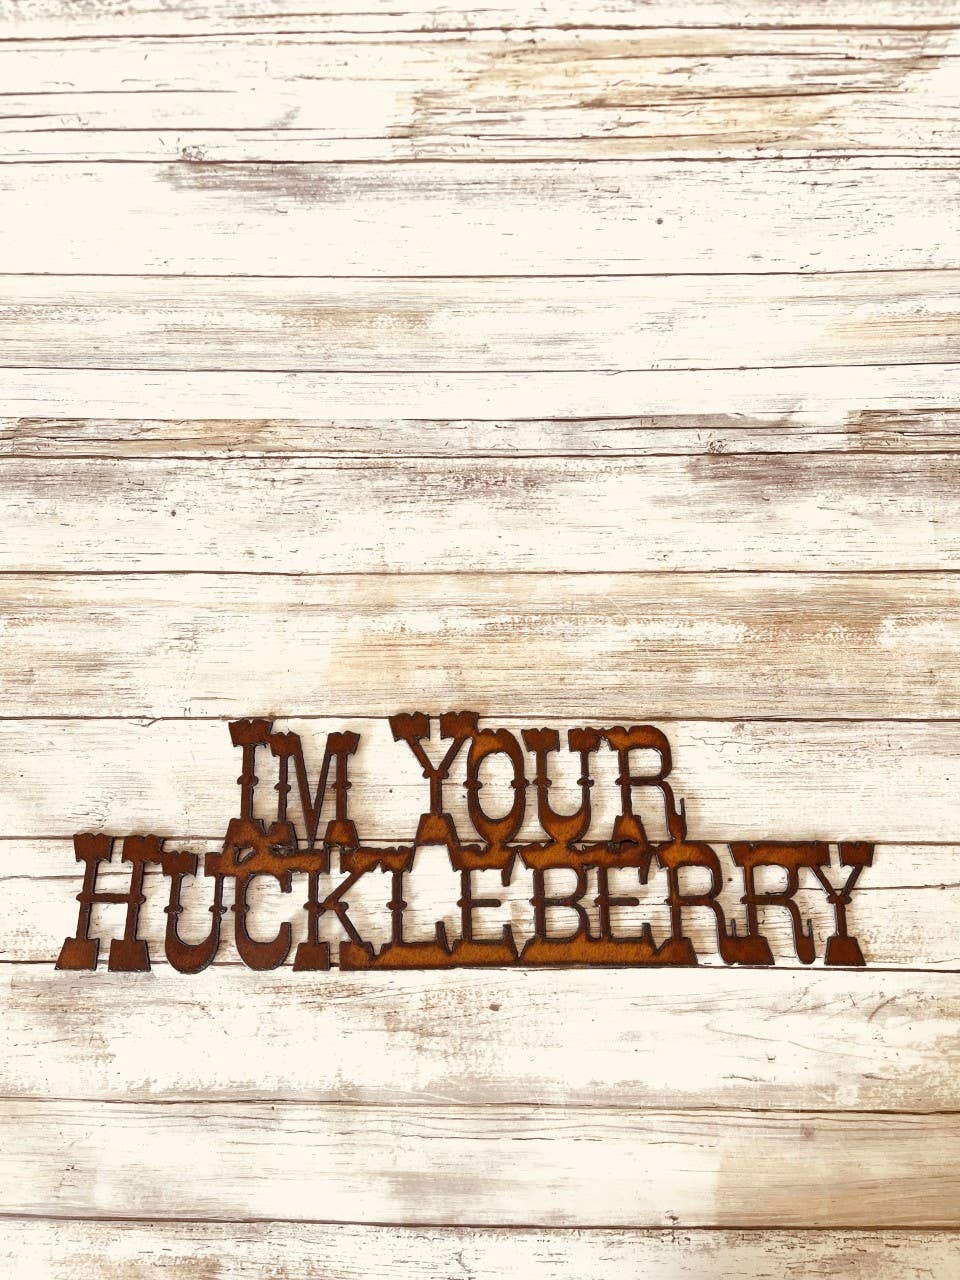 I'm Your Huckleberry Sign Rustic Metal Wall Sign